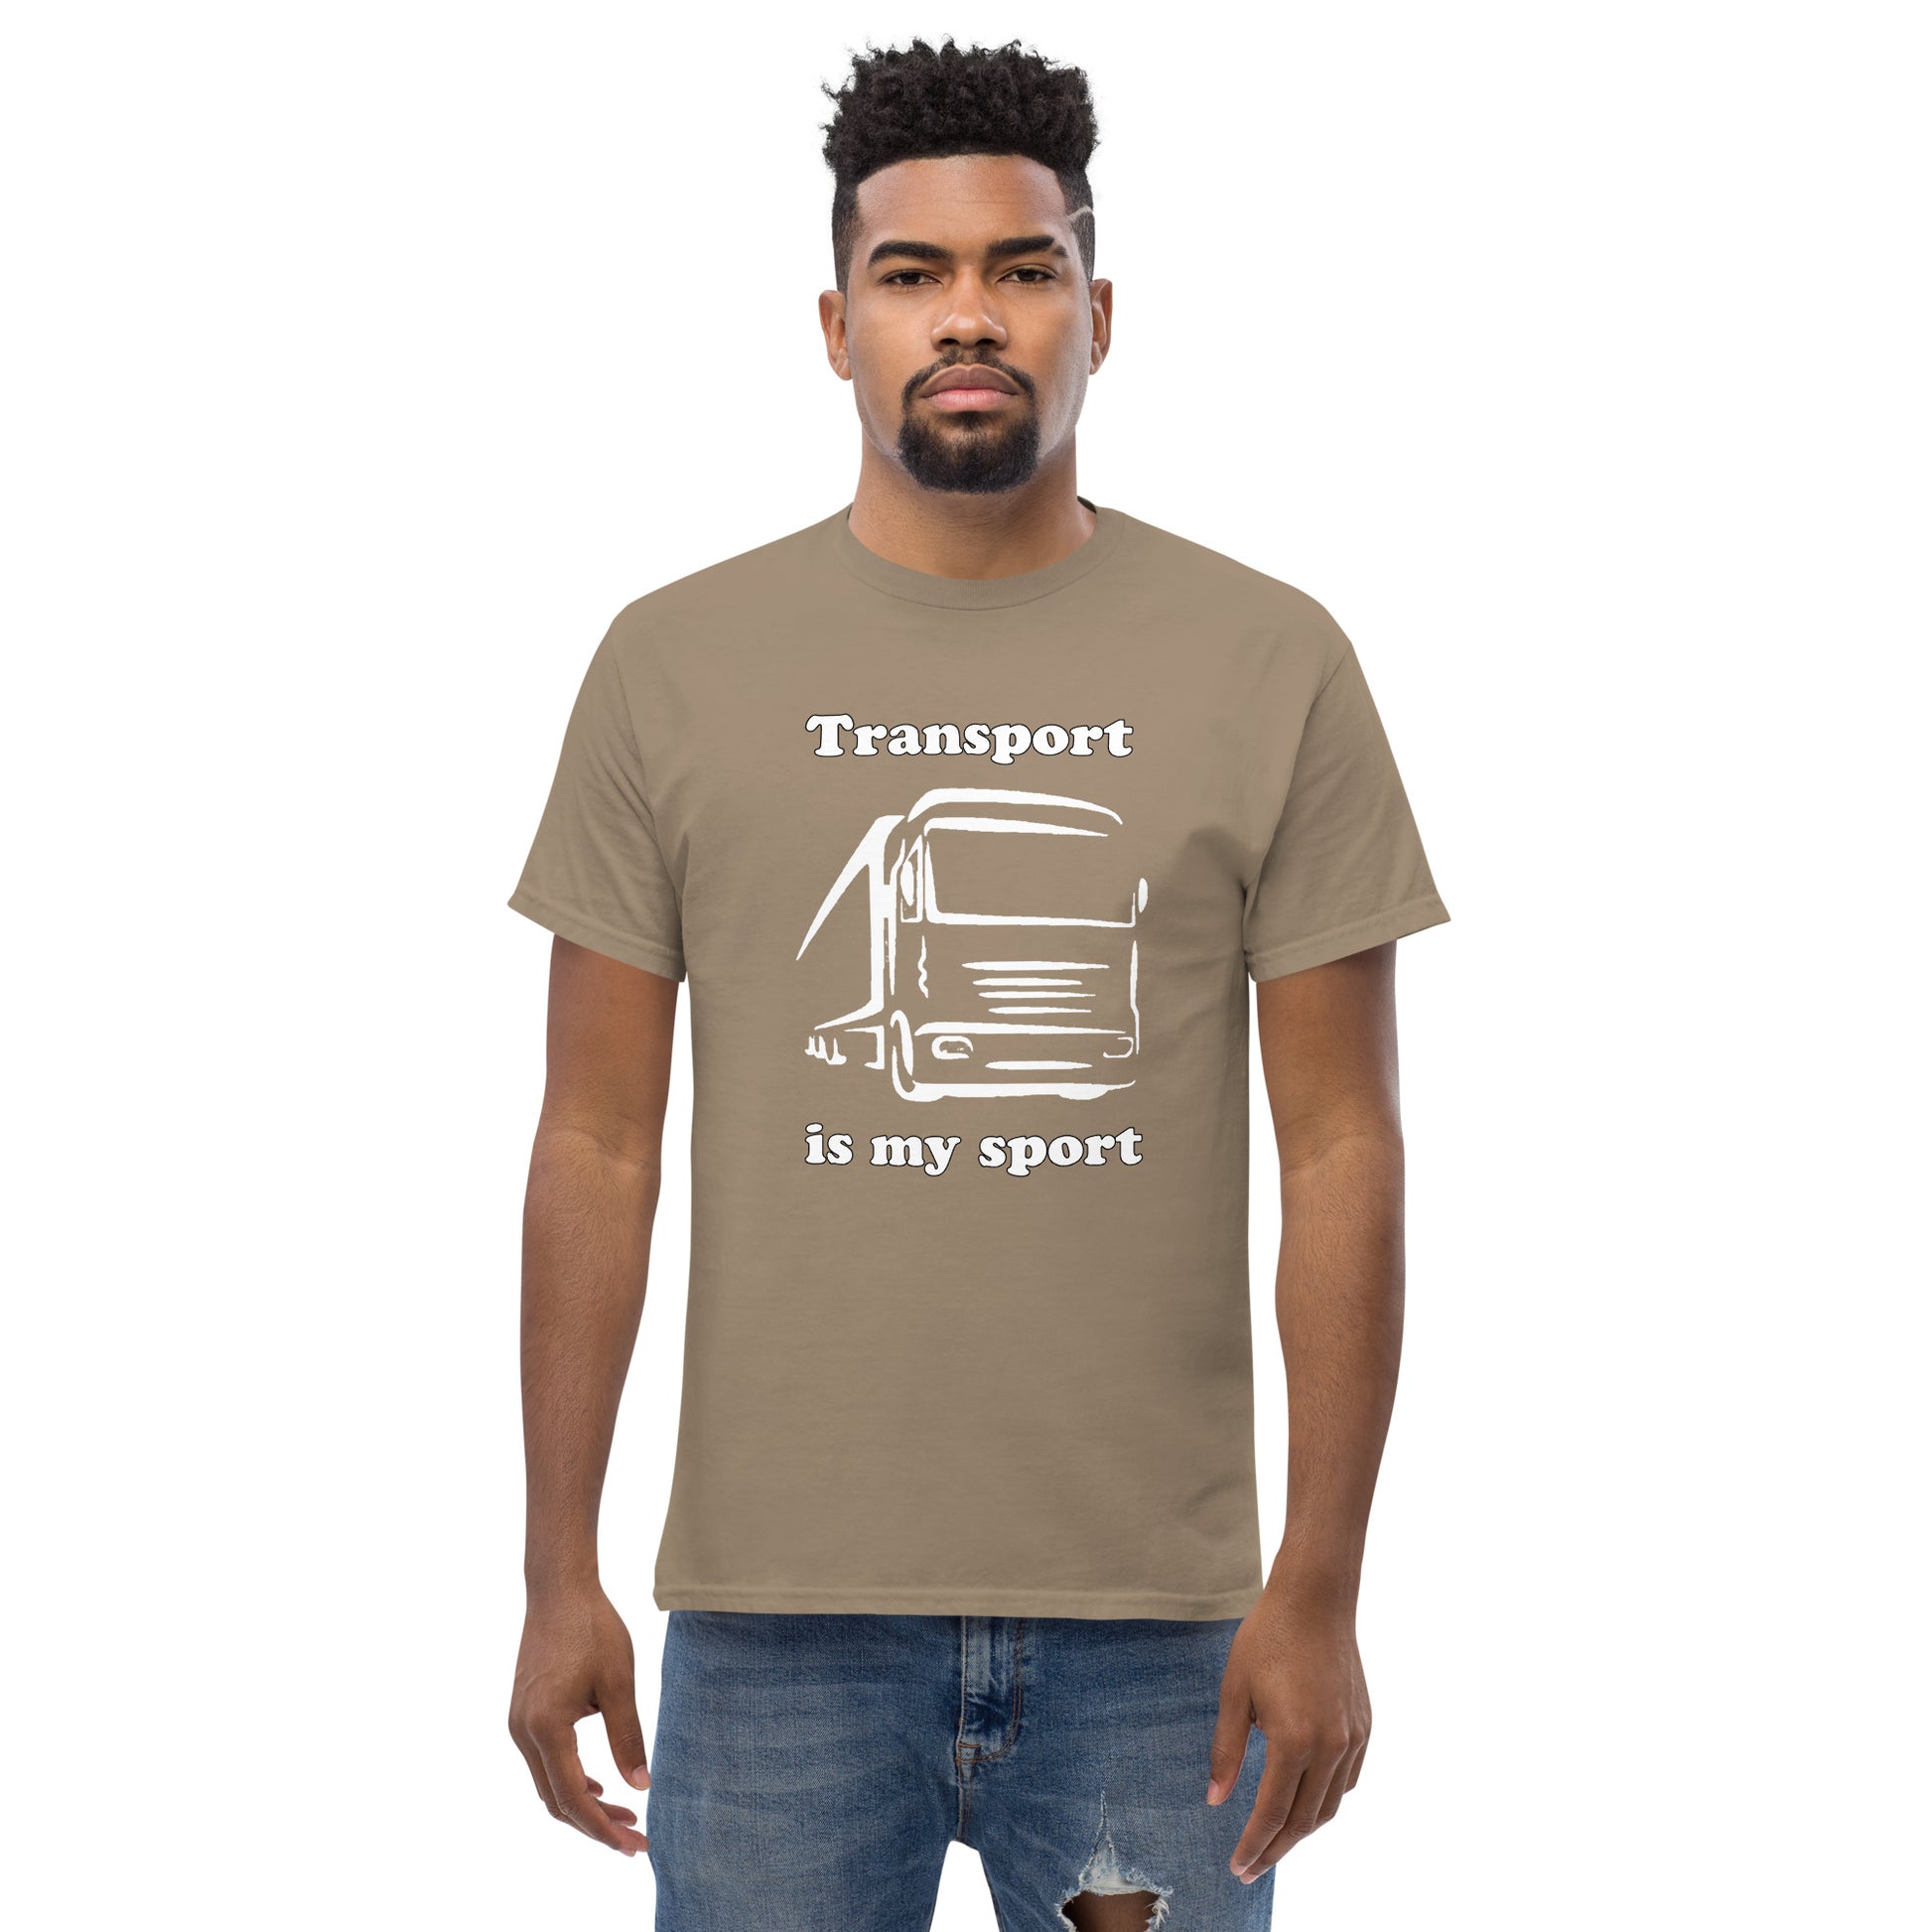 Man with brown t-shirt with picture of truck and text "Transport is my sport"